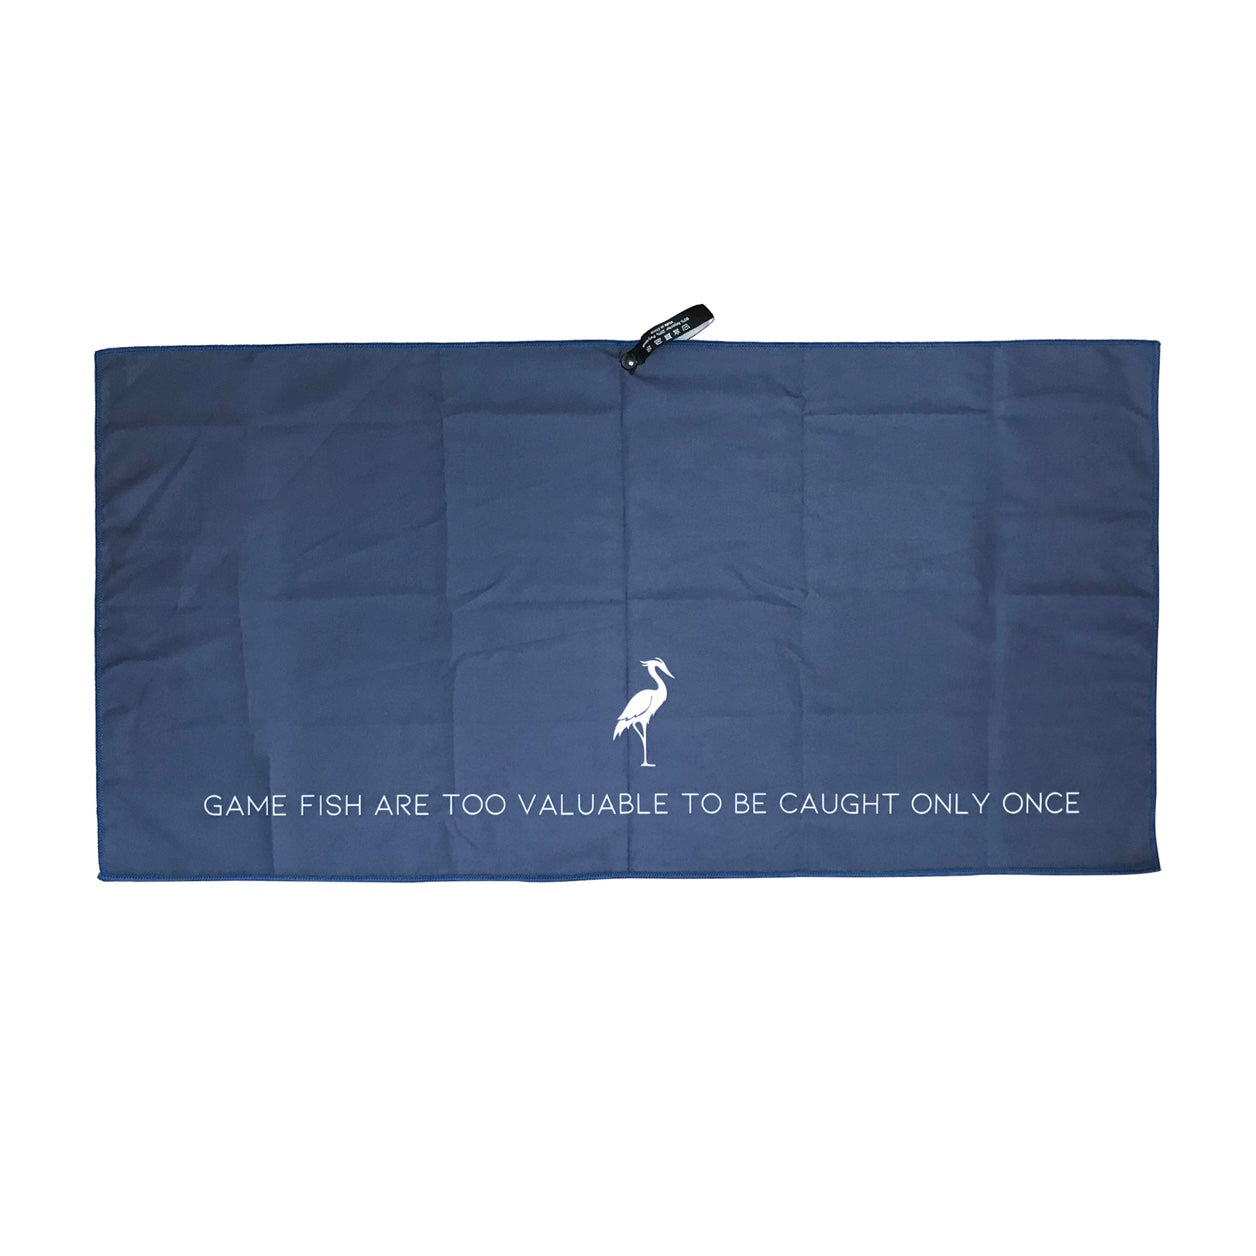 Born on the Bay Boat Towel